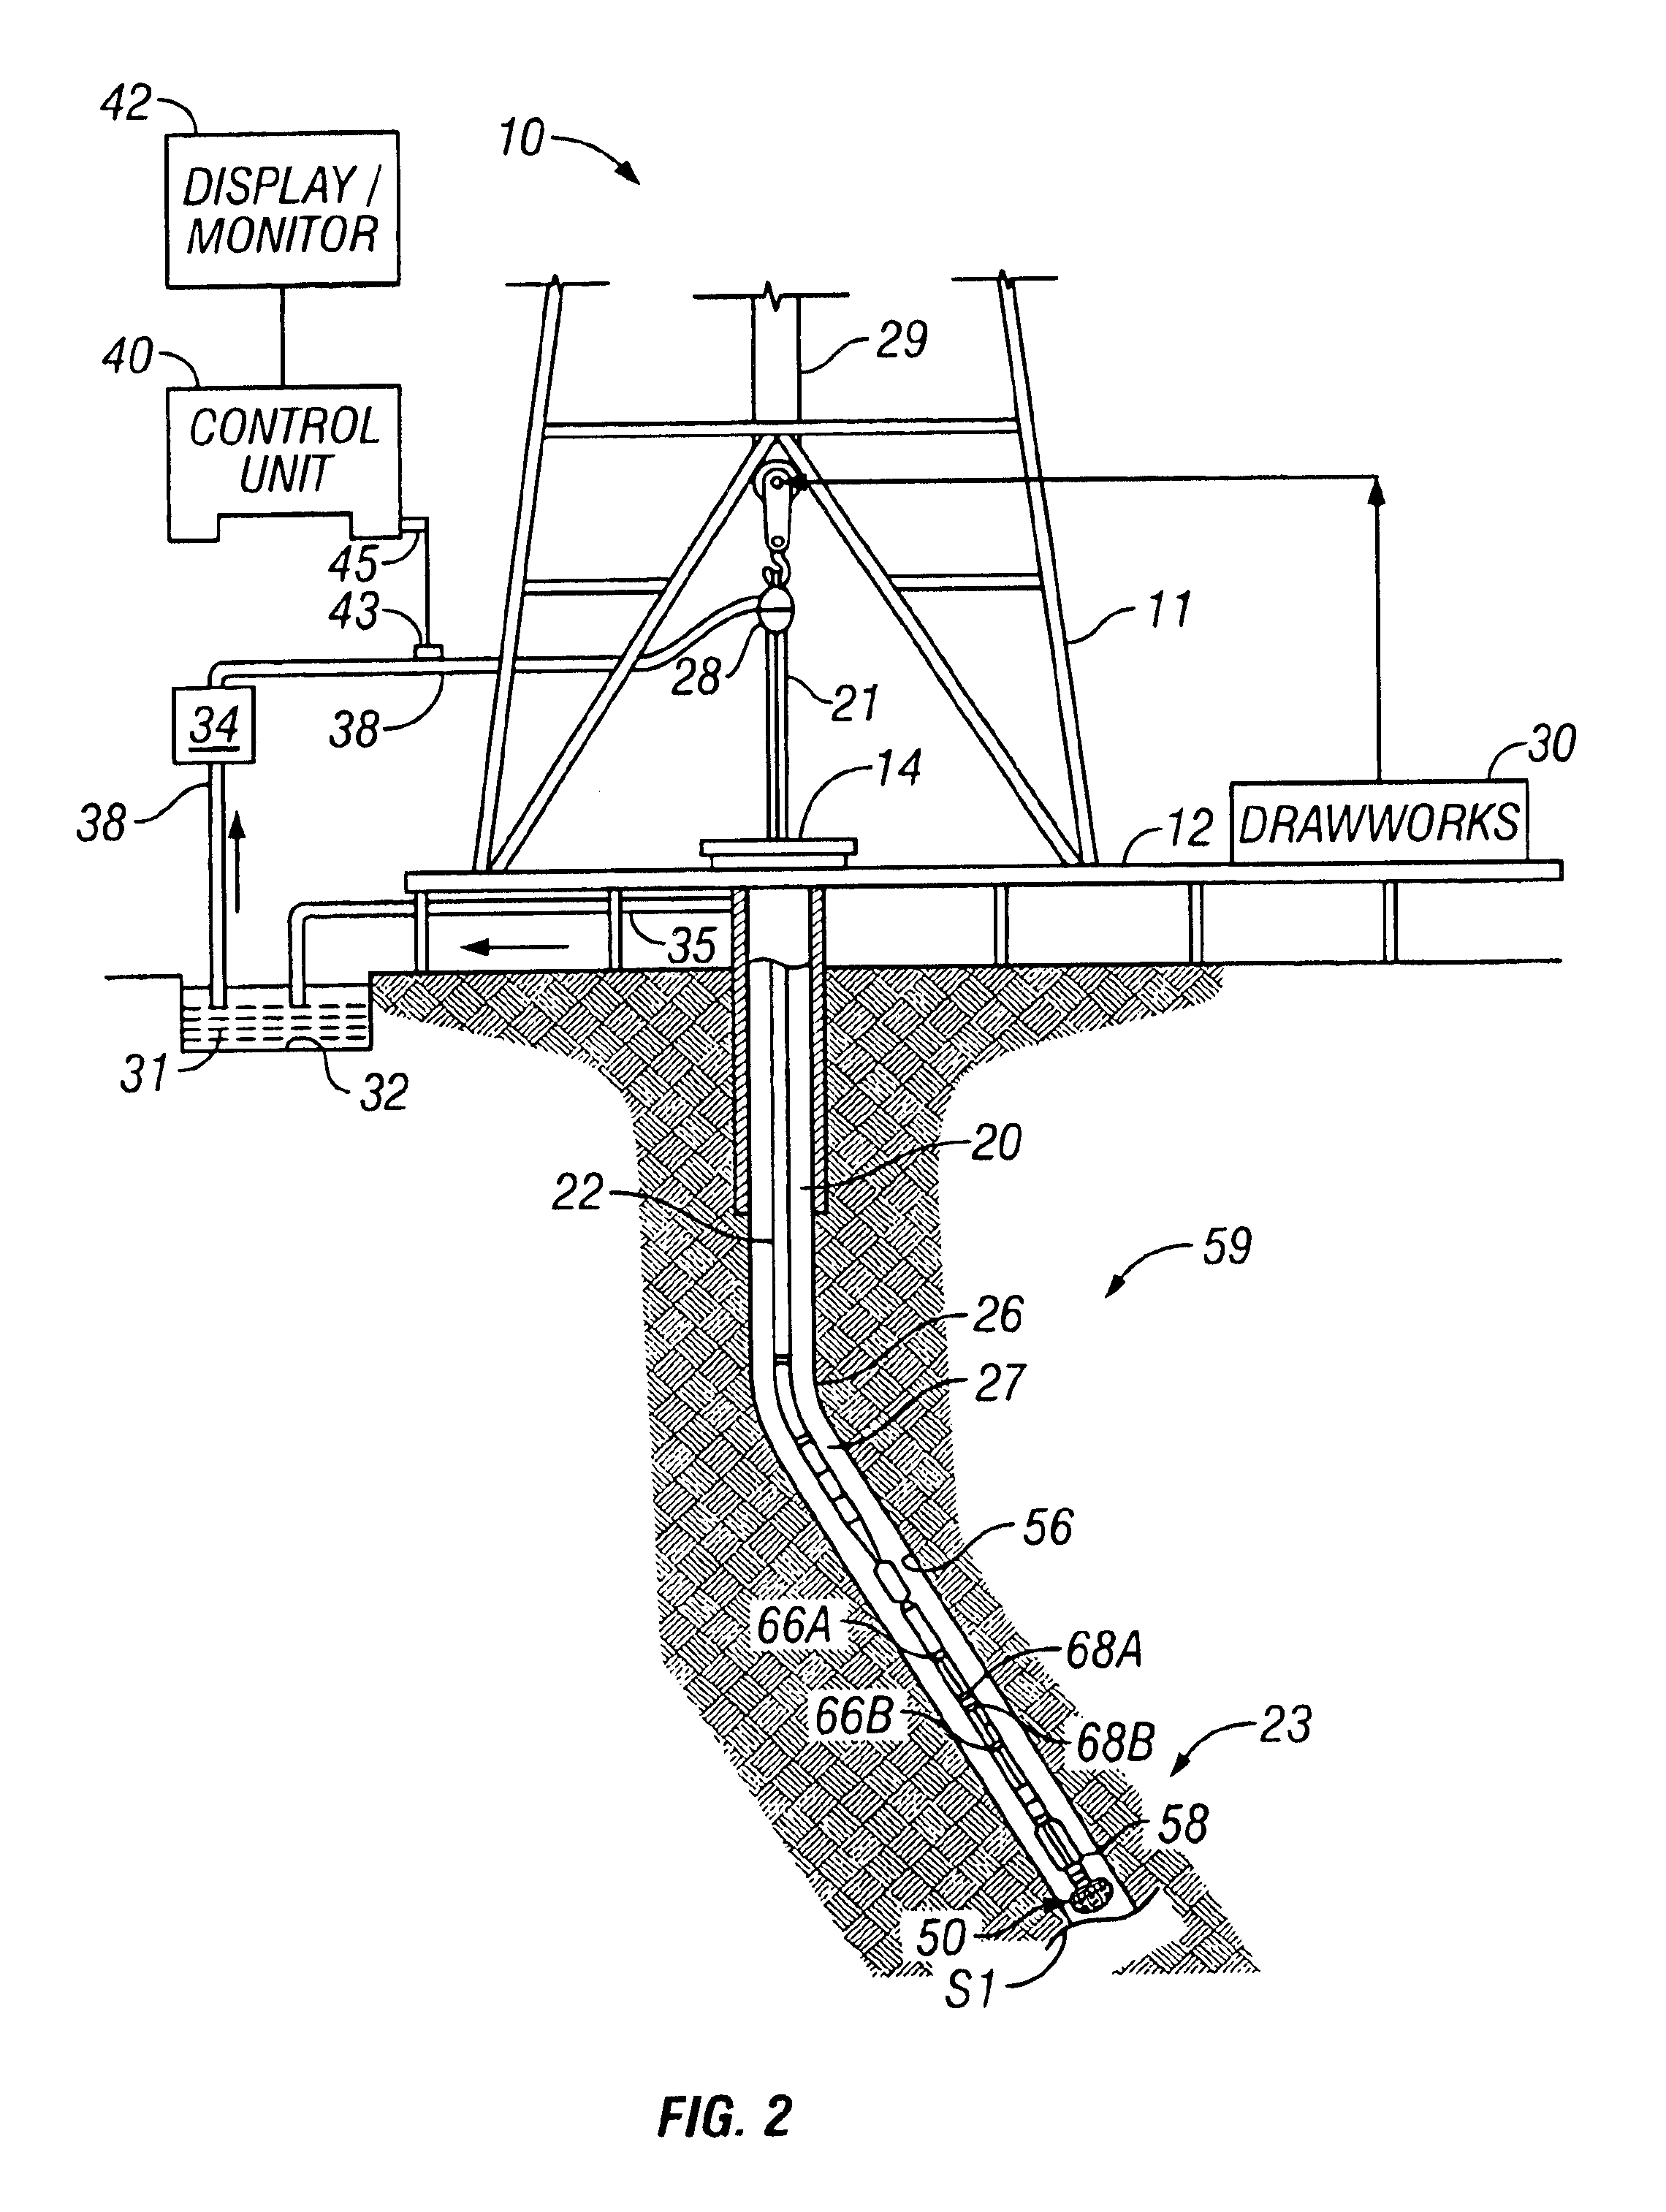 Synthetic acoustic array acquisition and processing